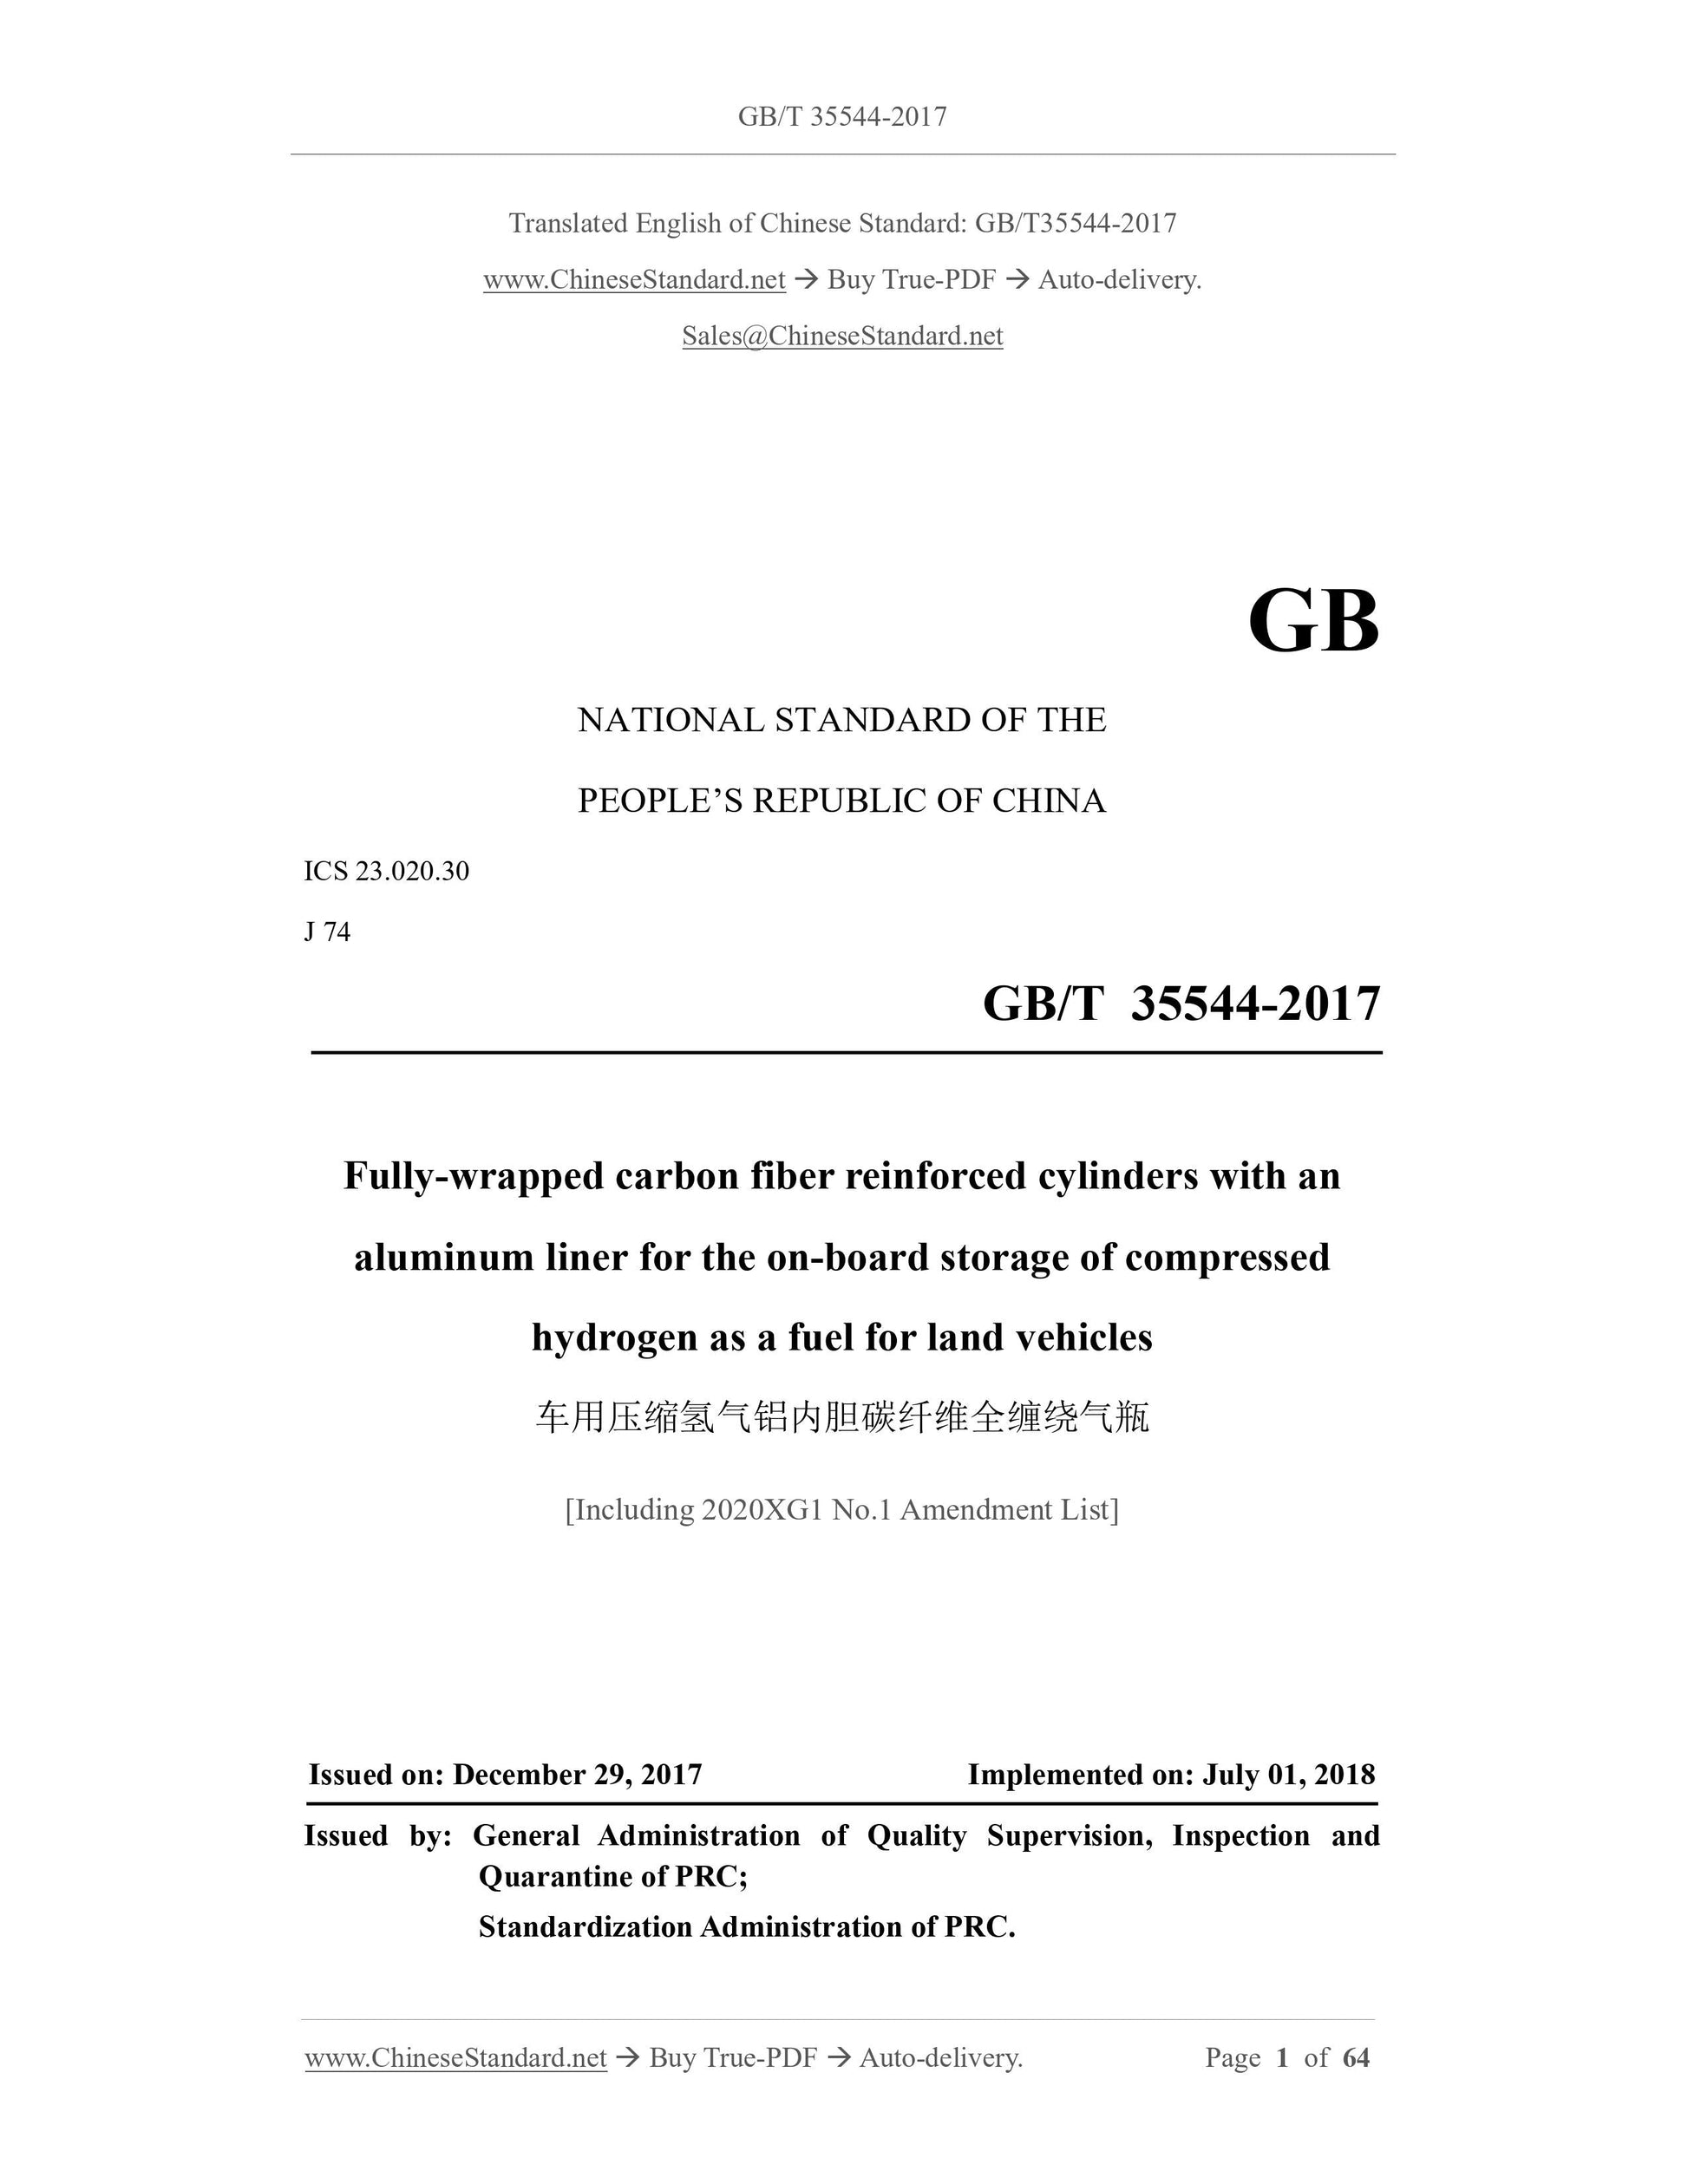 GB/T 35544-2017 Page 1